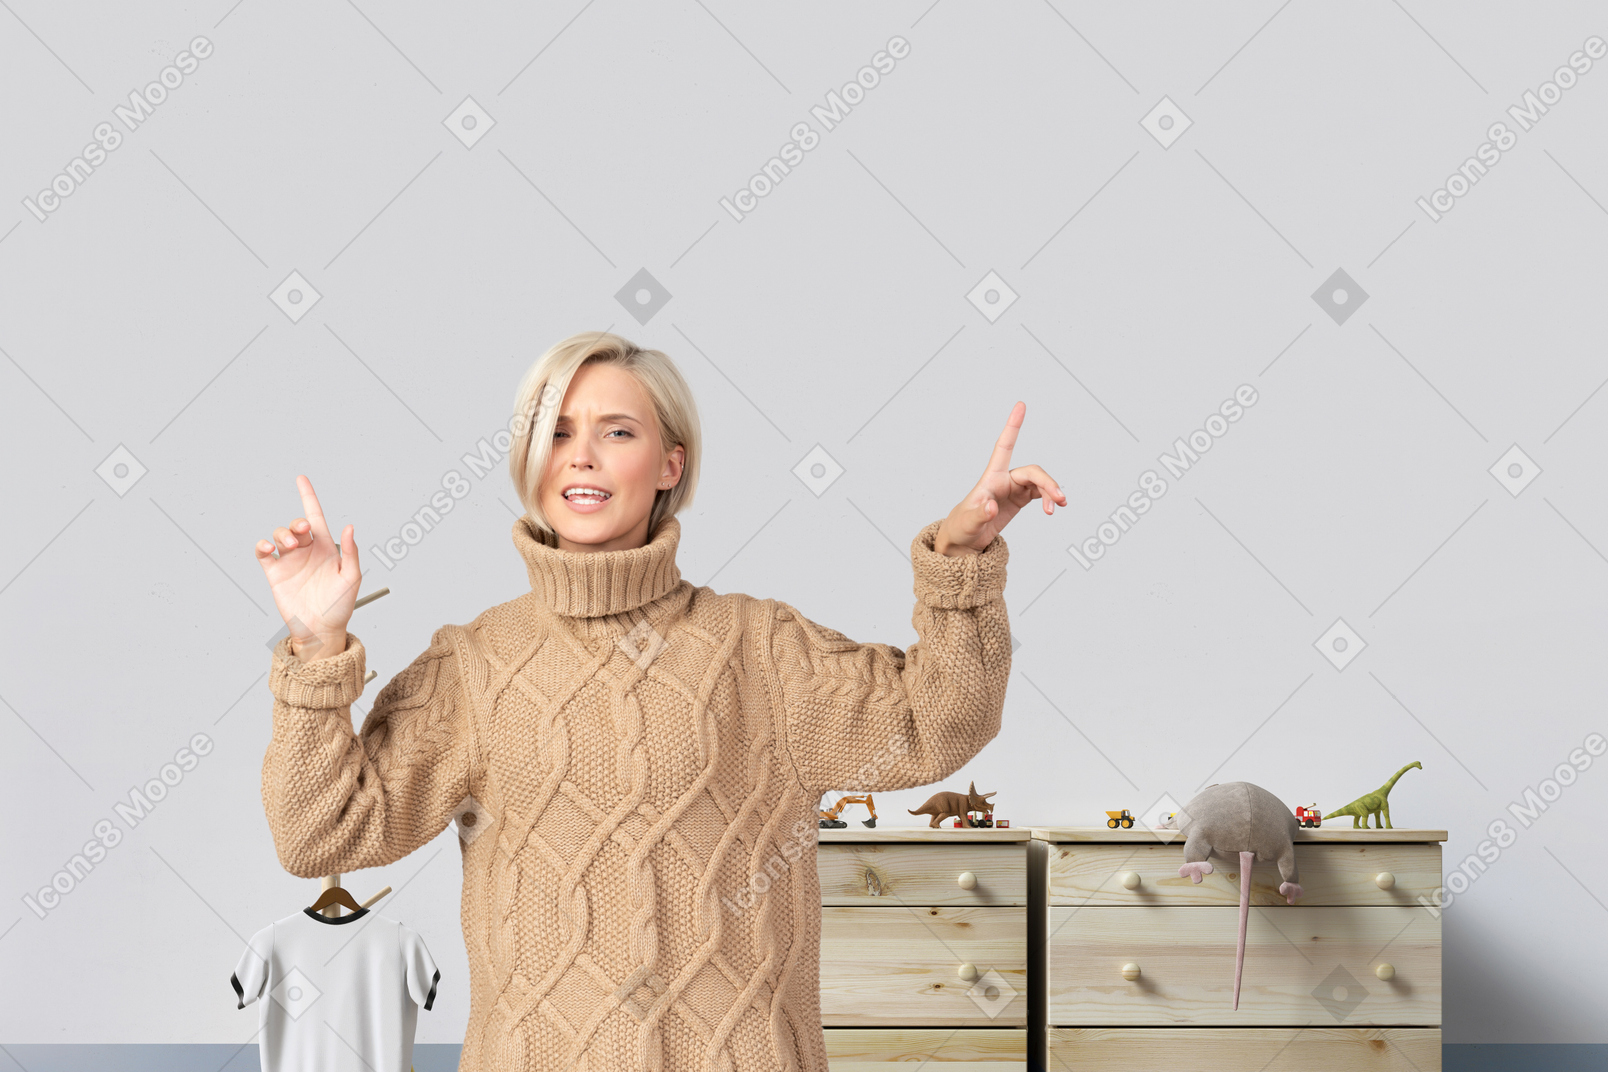 Woman standing in front of a dresser and pointing up